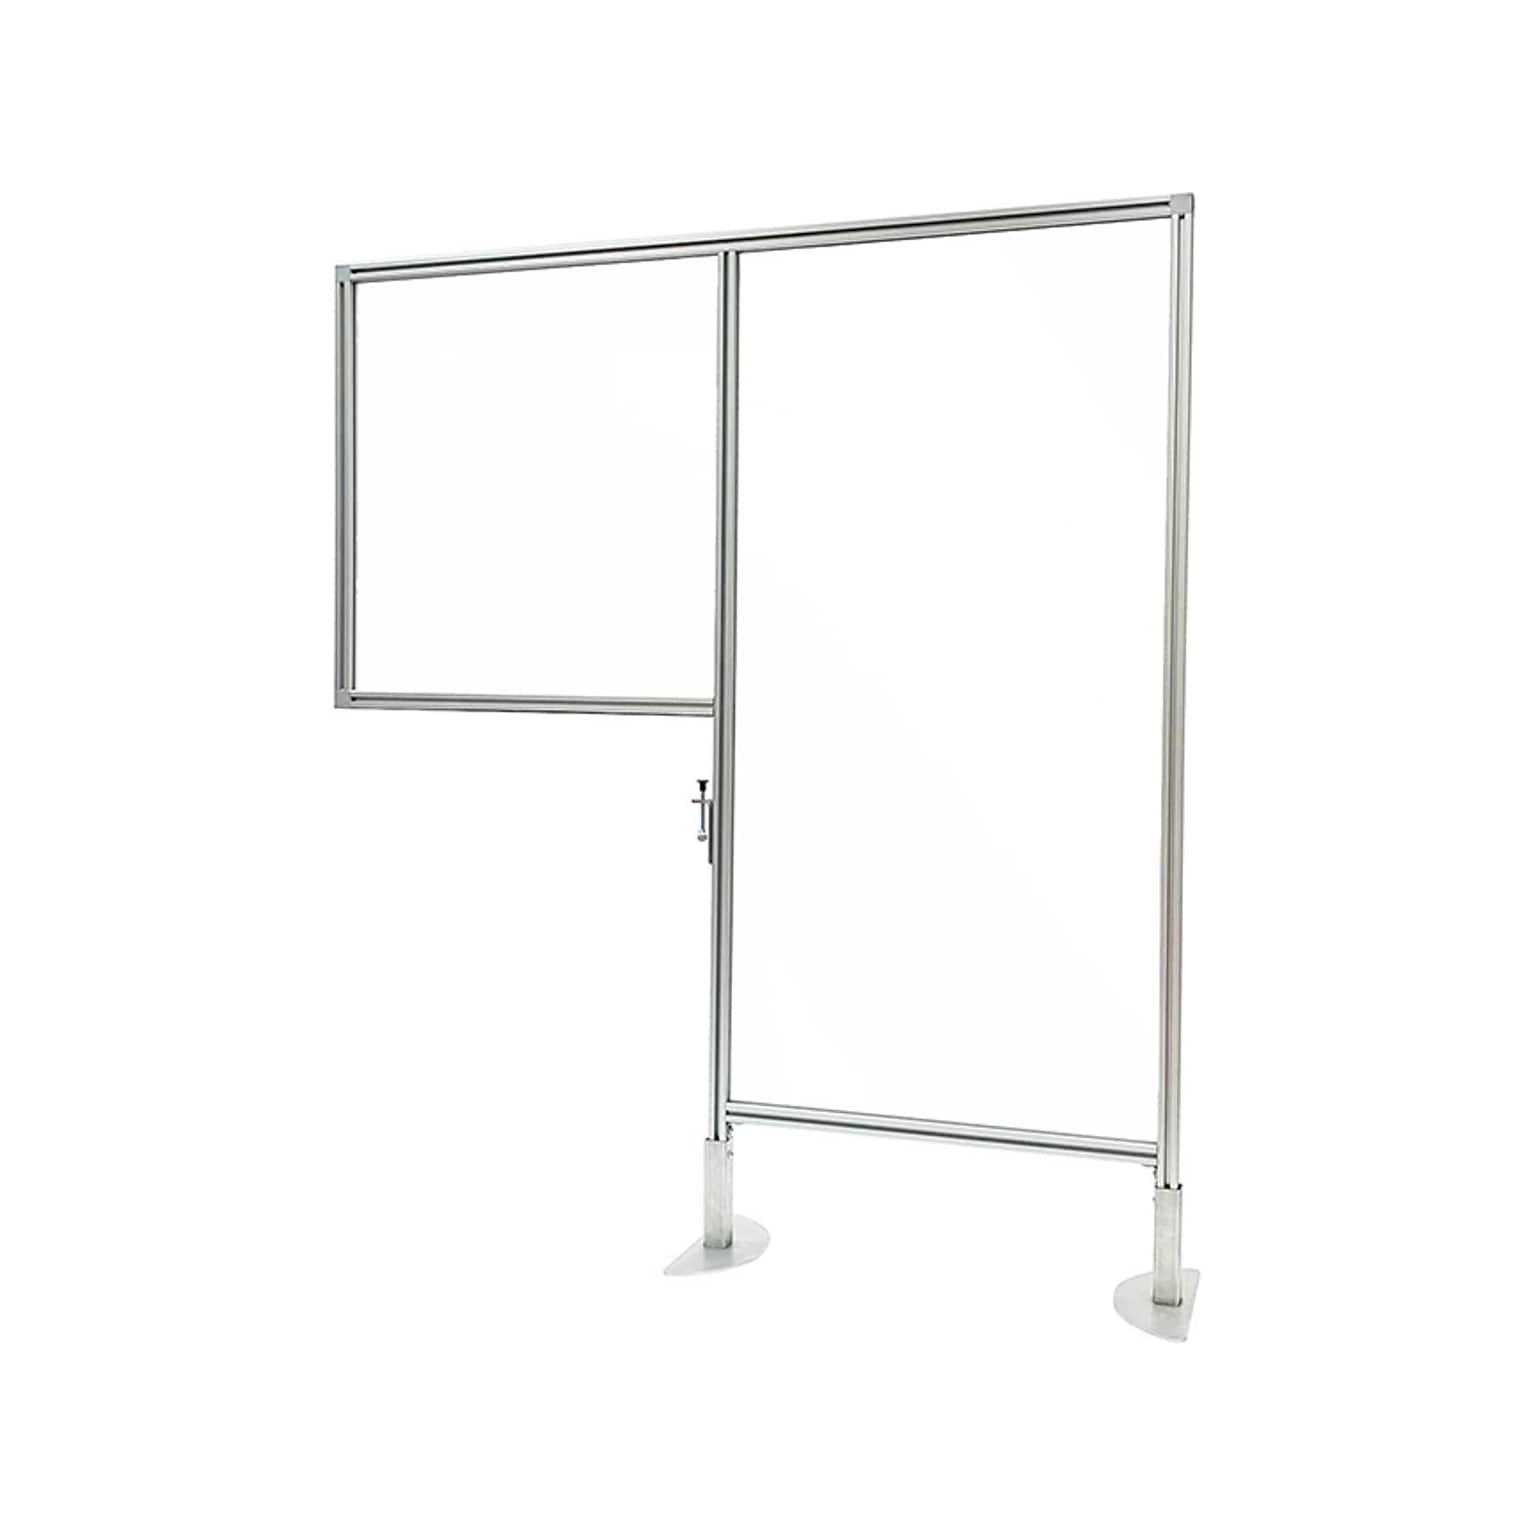 Ghent Clamp Mount Workstation Divider 57H x 46.75W, Clear/White Thermoplastic/Porcelain (WSD2-5747-M1)